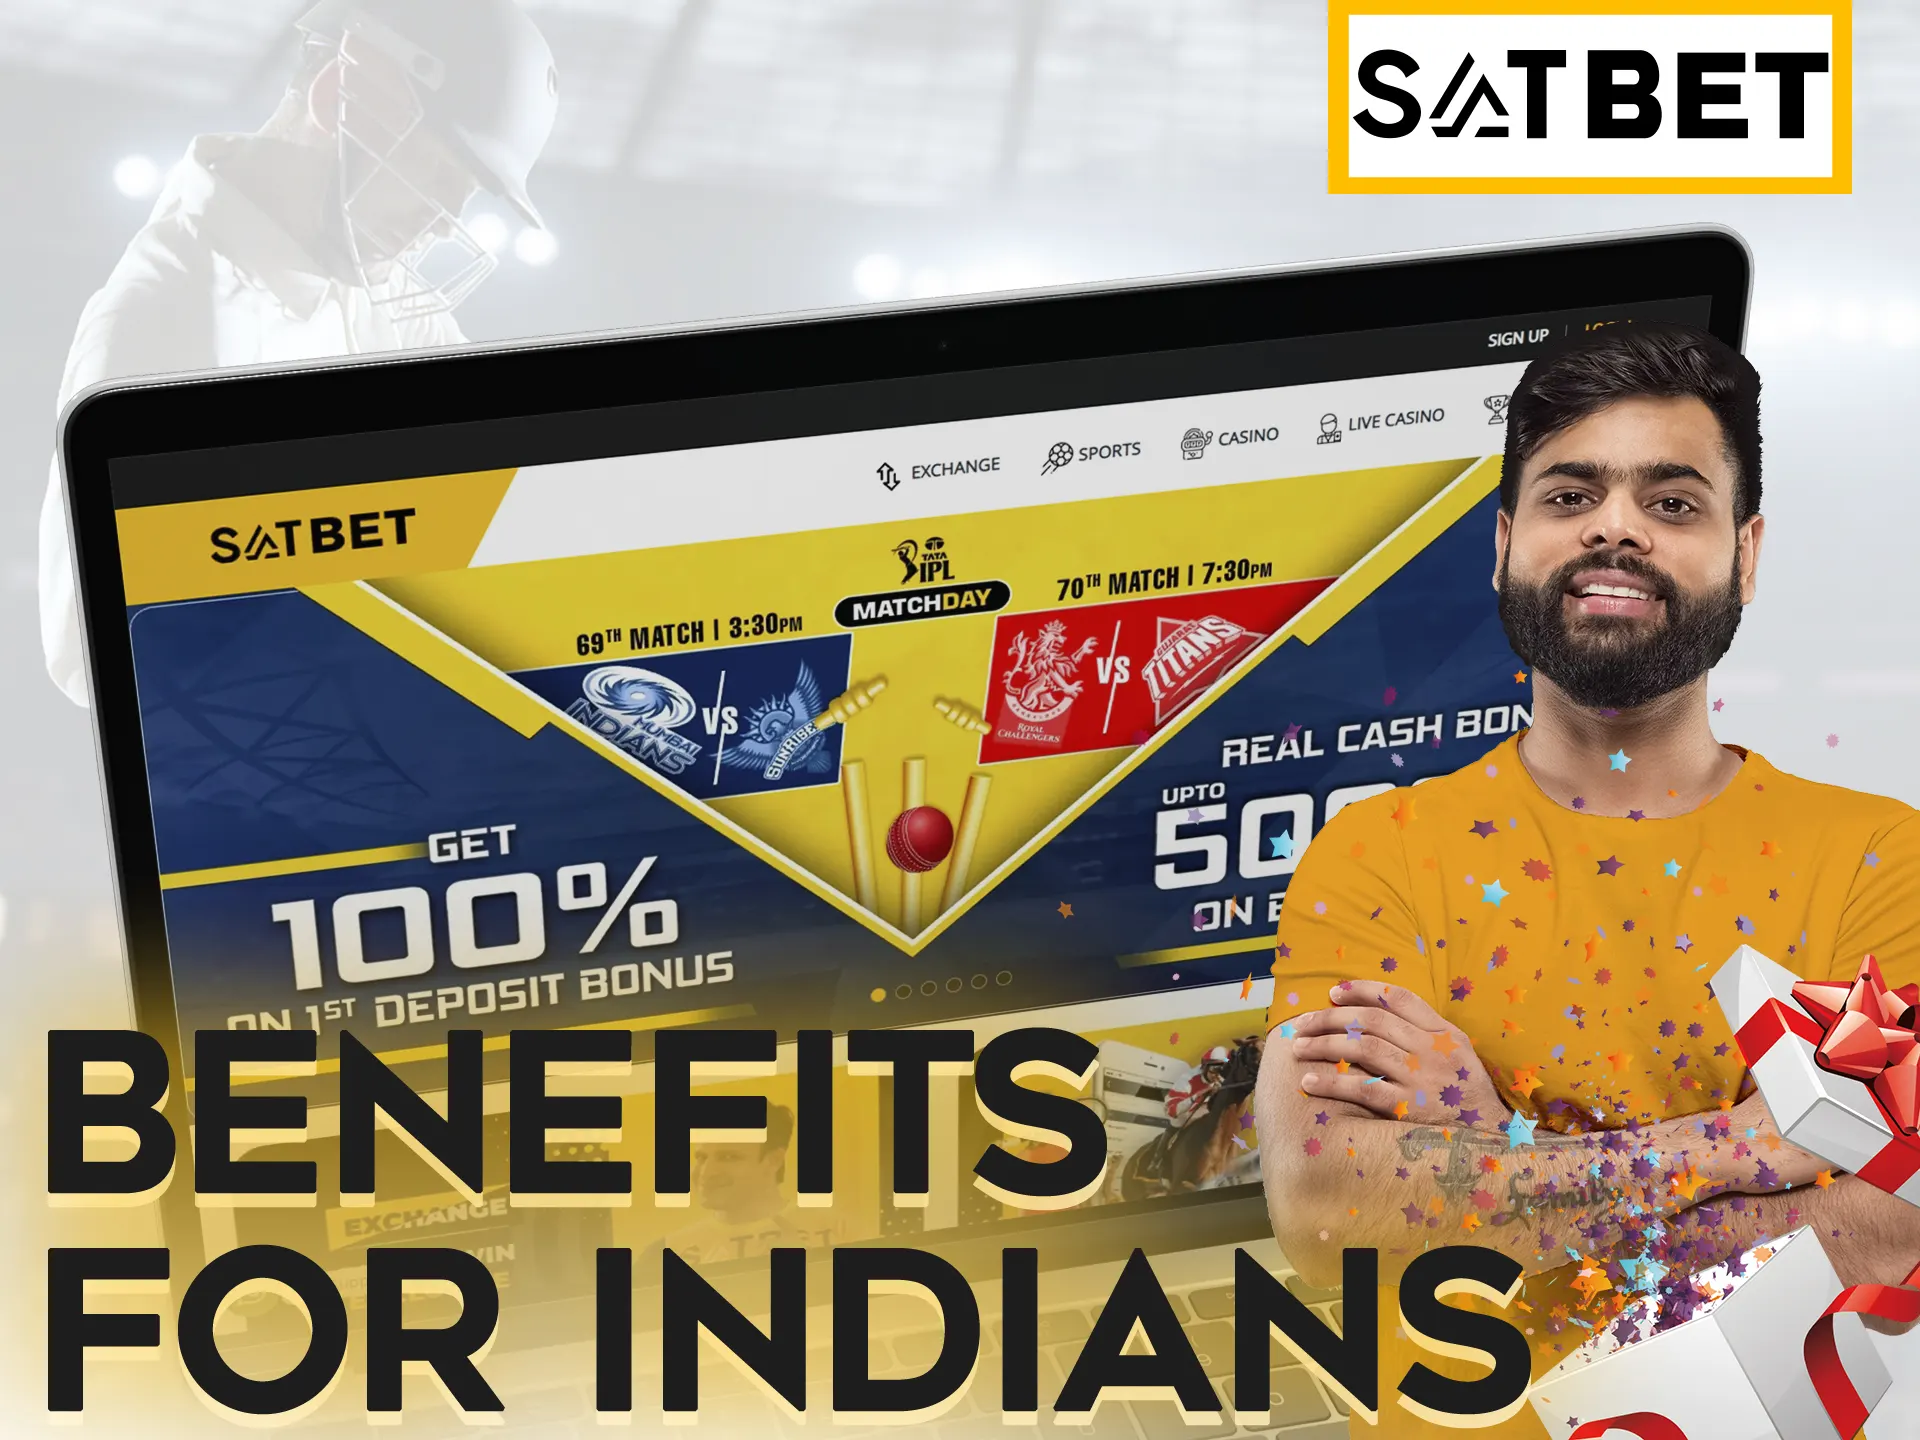 Get additional bonuses at Satbet if you bet from India.